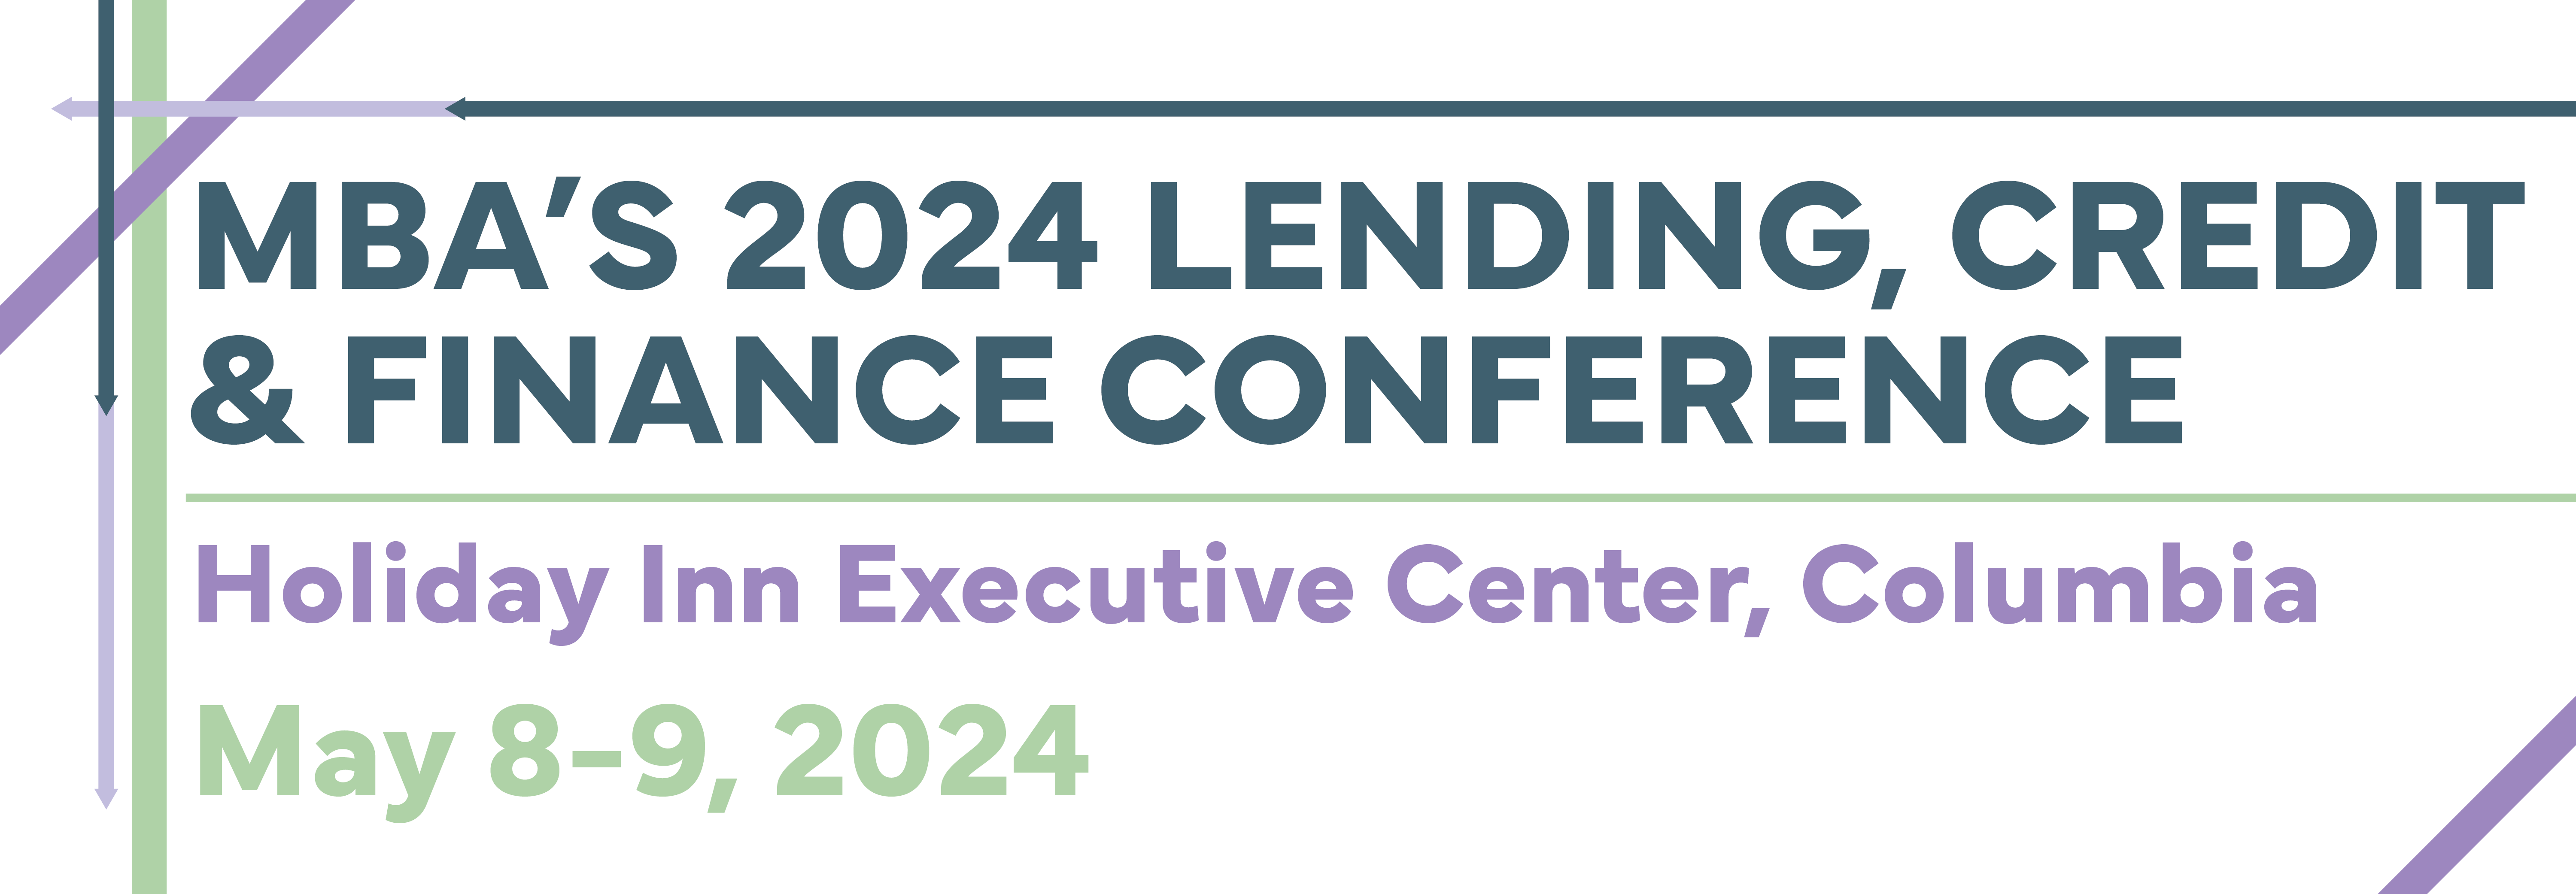 MBA's 2024 Lending, Credit & Finance Conference